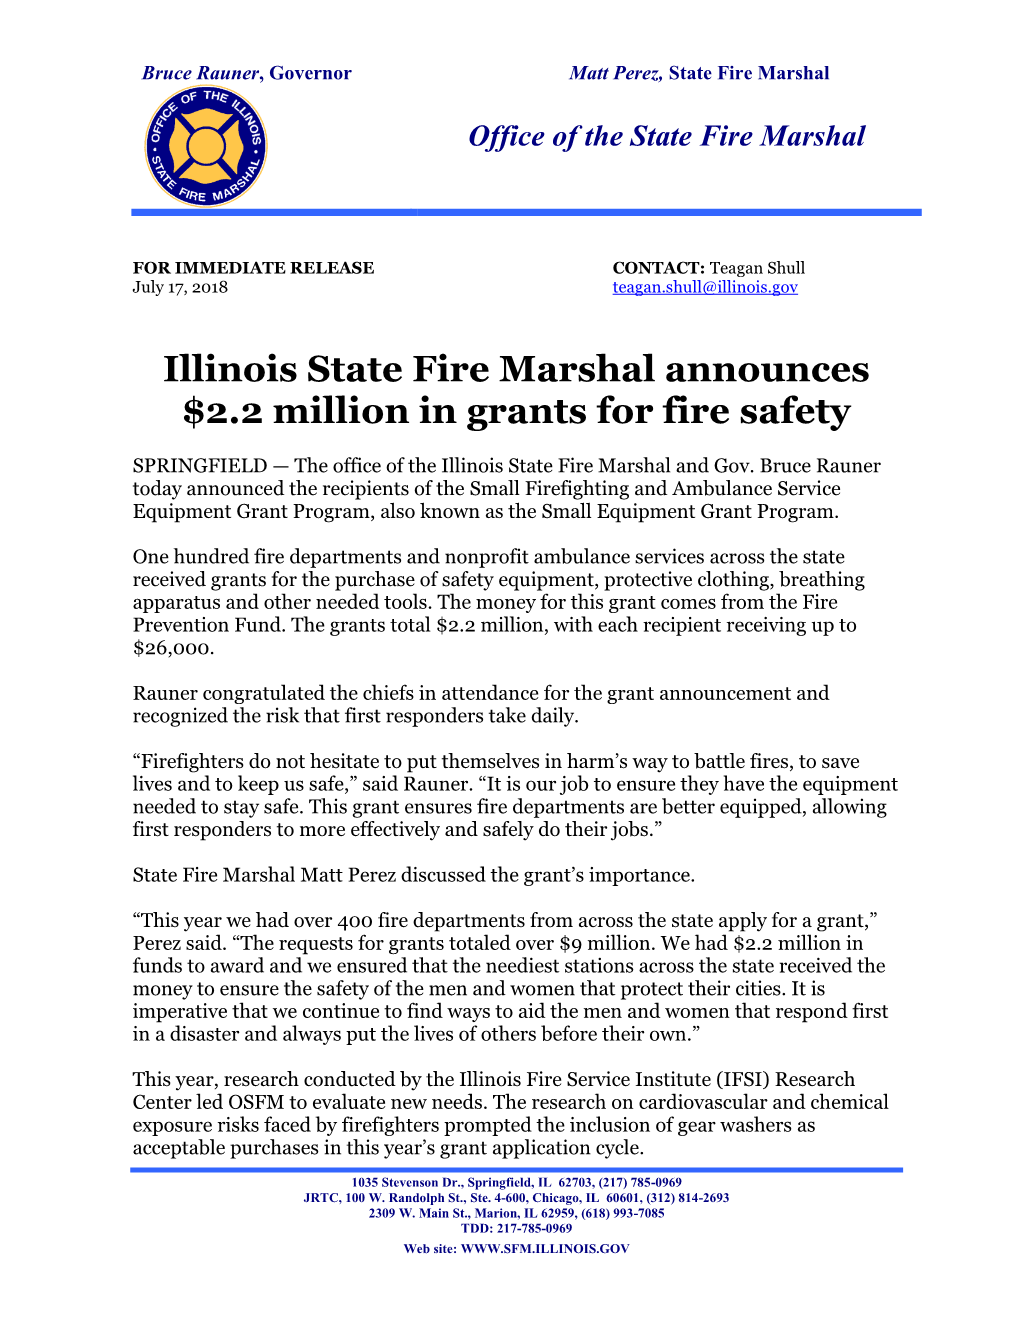 Illinois State Fire Marshal Announces $2.2 Million in Grants for Fire Safety